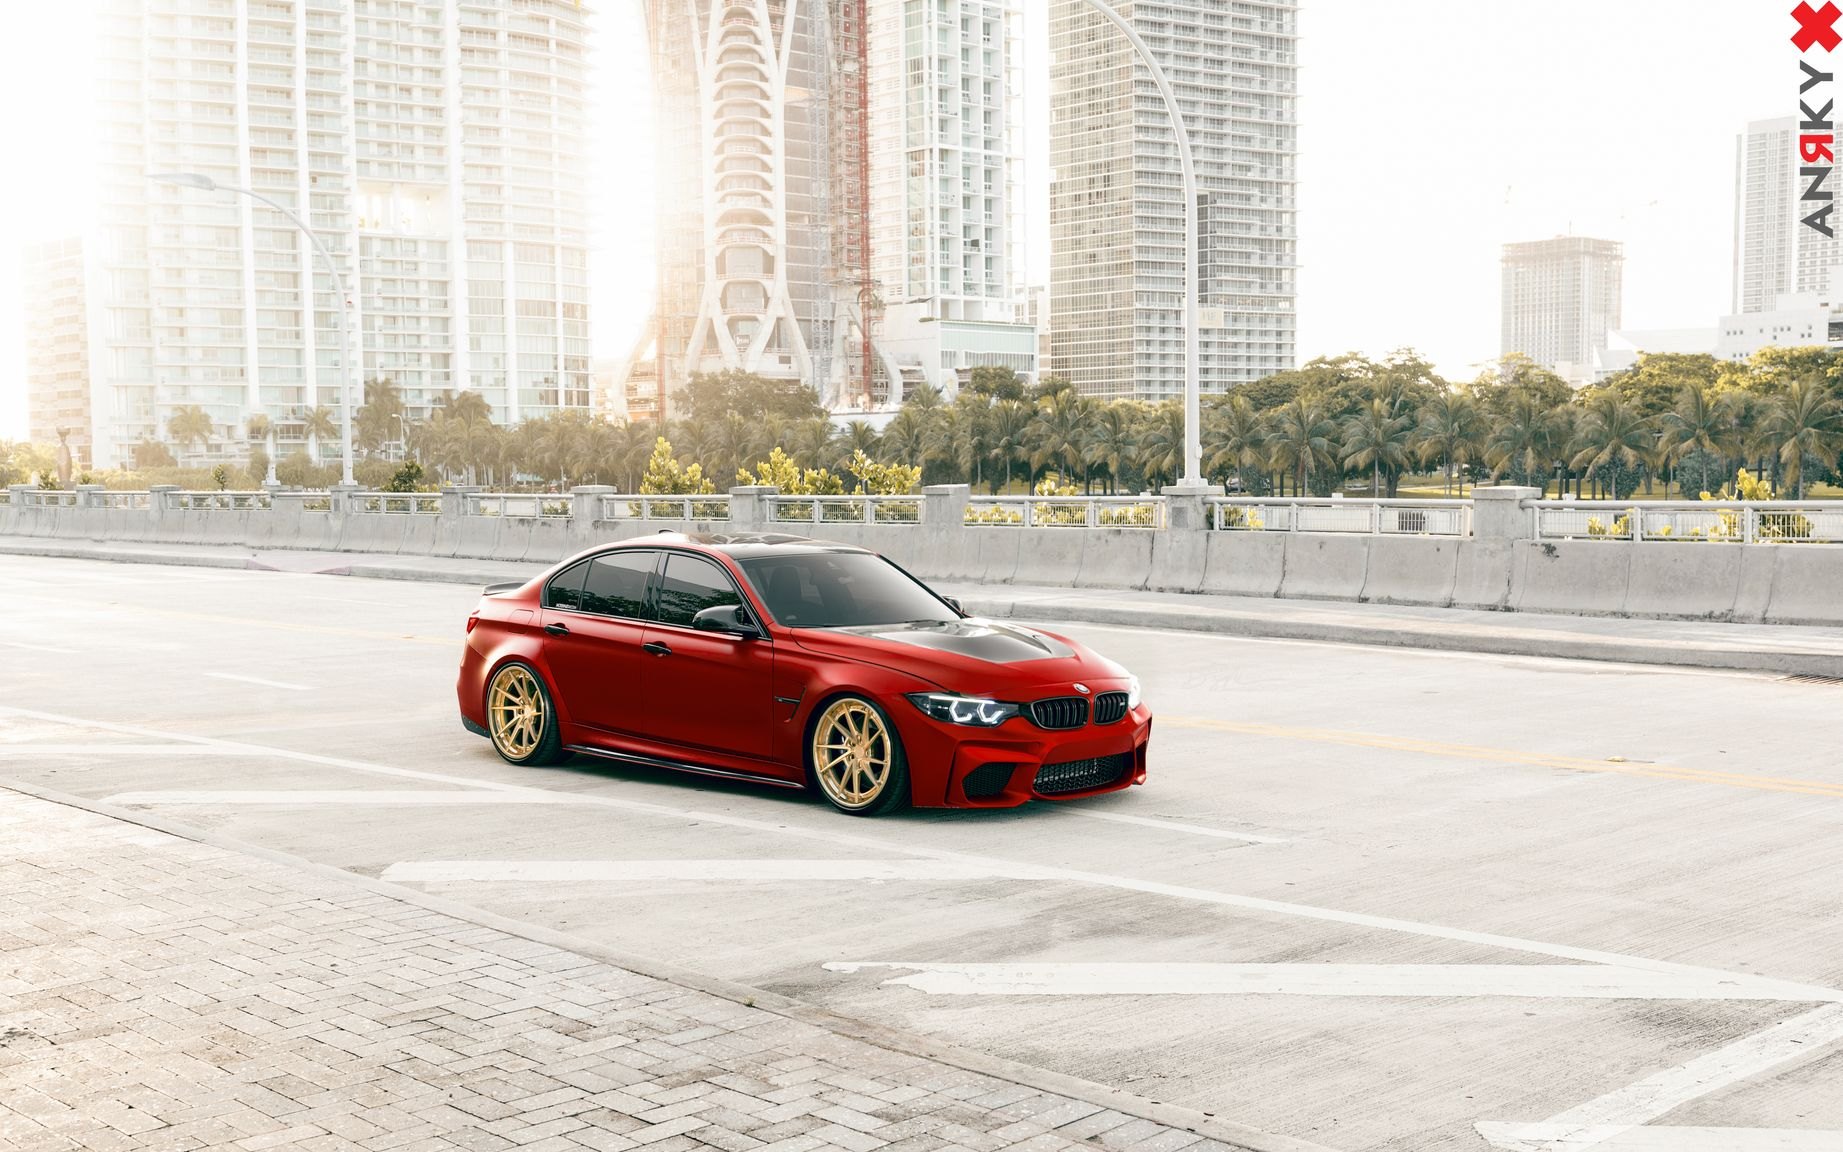 Ice Gold Anrky Wheels on Red BMW 3-Series - Photo by Anrky Wheels